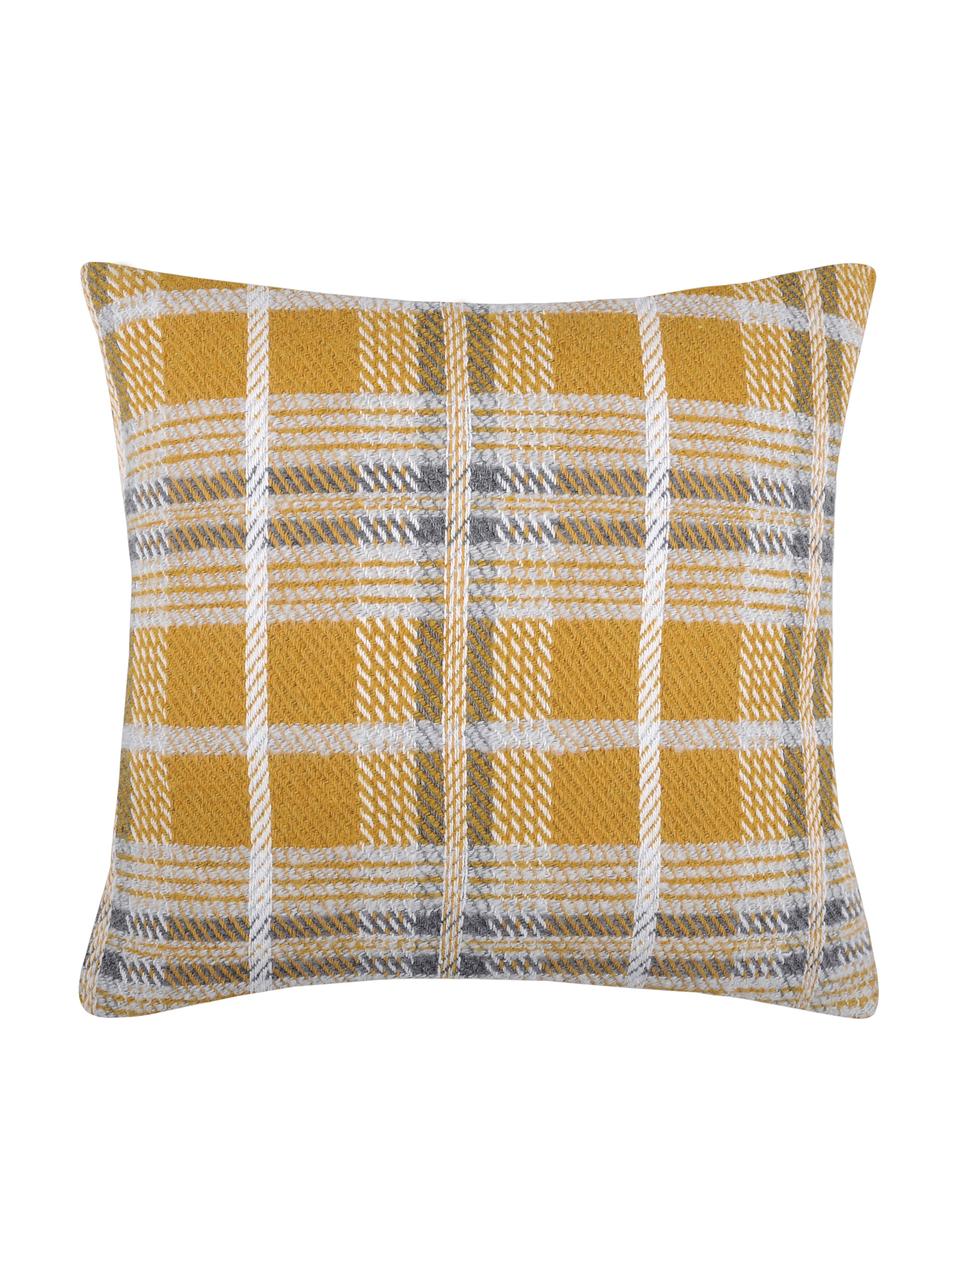 Coussin 45x45 jaune moutarde Arnold, Jaune moutarde, blanc, gris